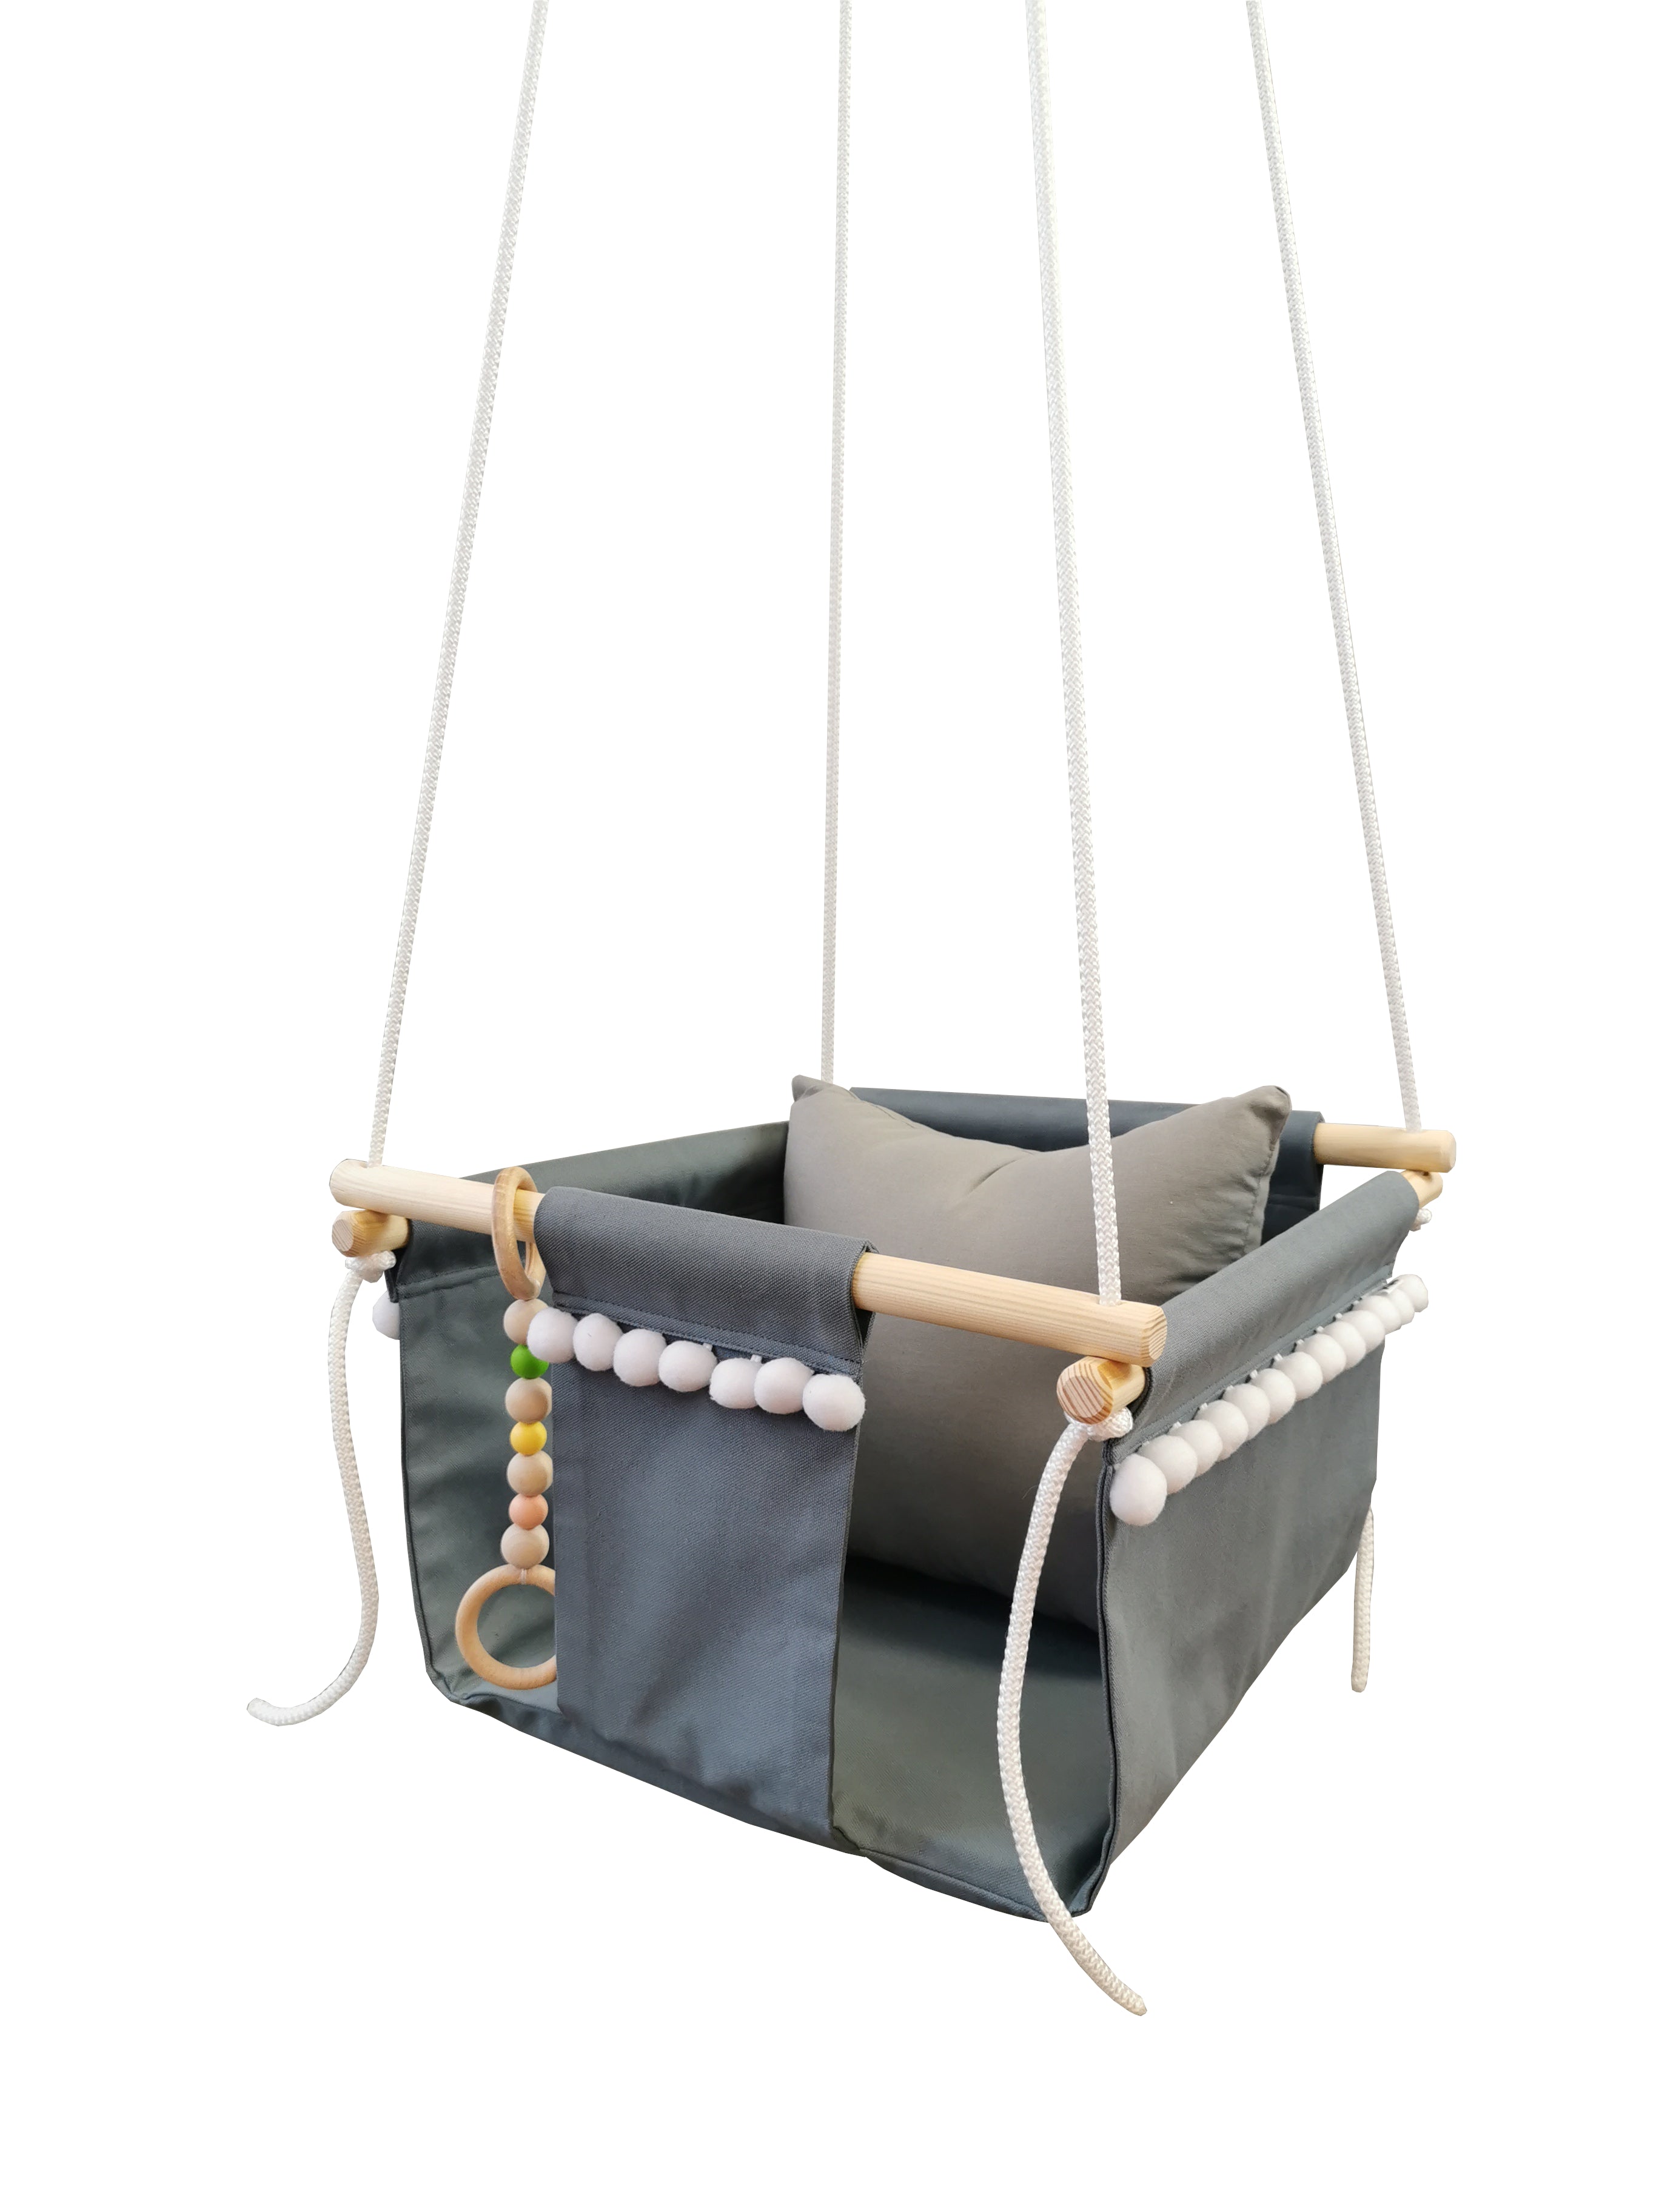 Swing for Kids "Gray" with pompom's